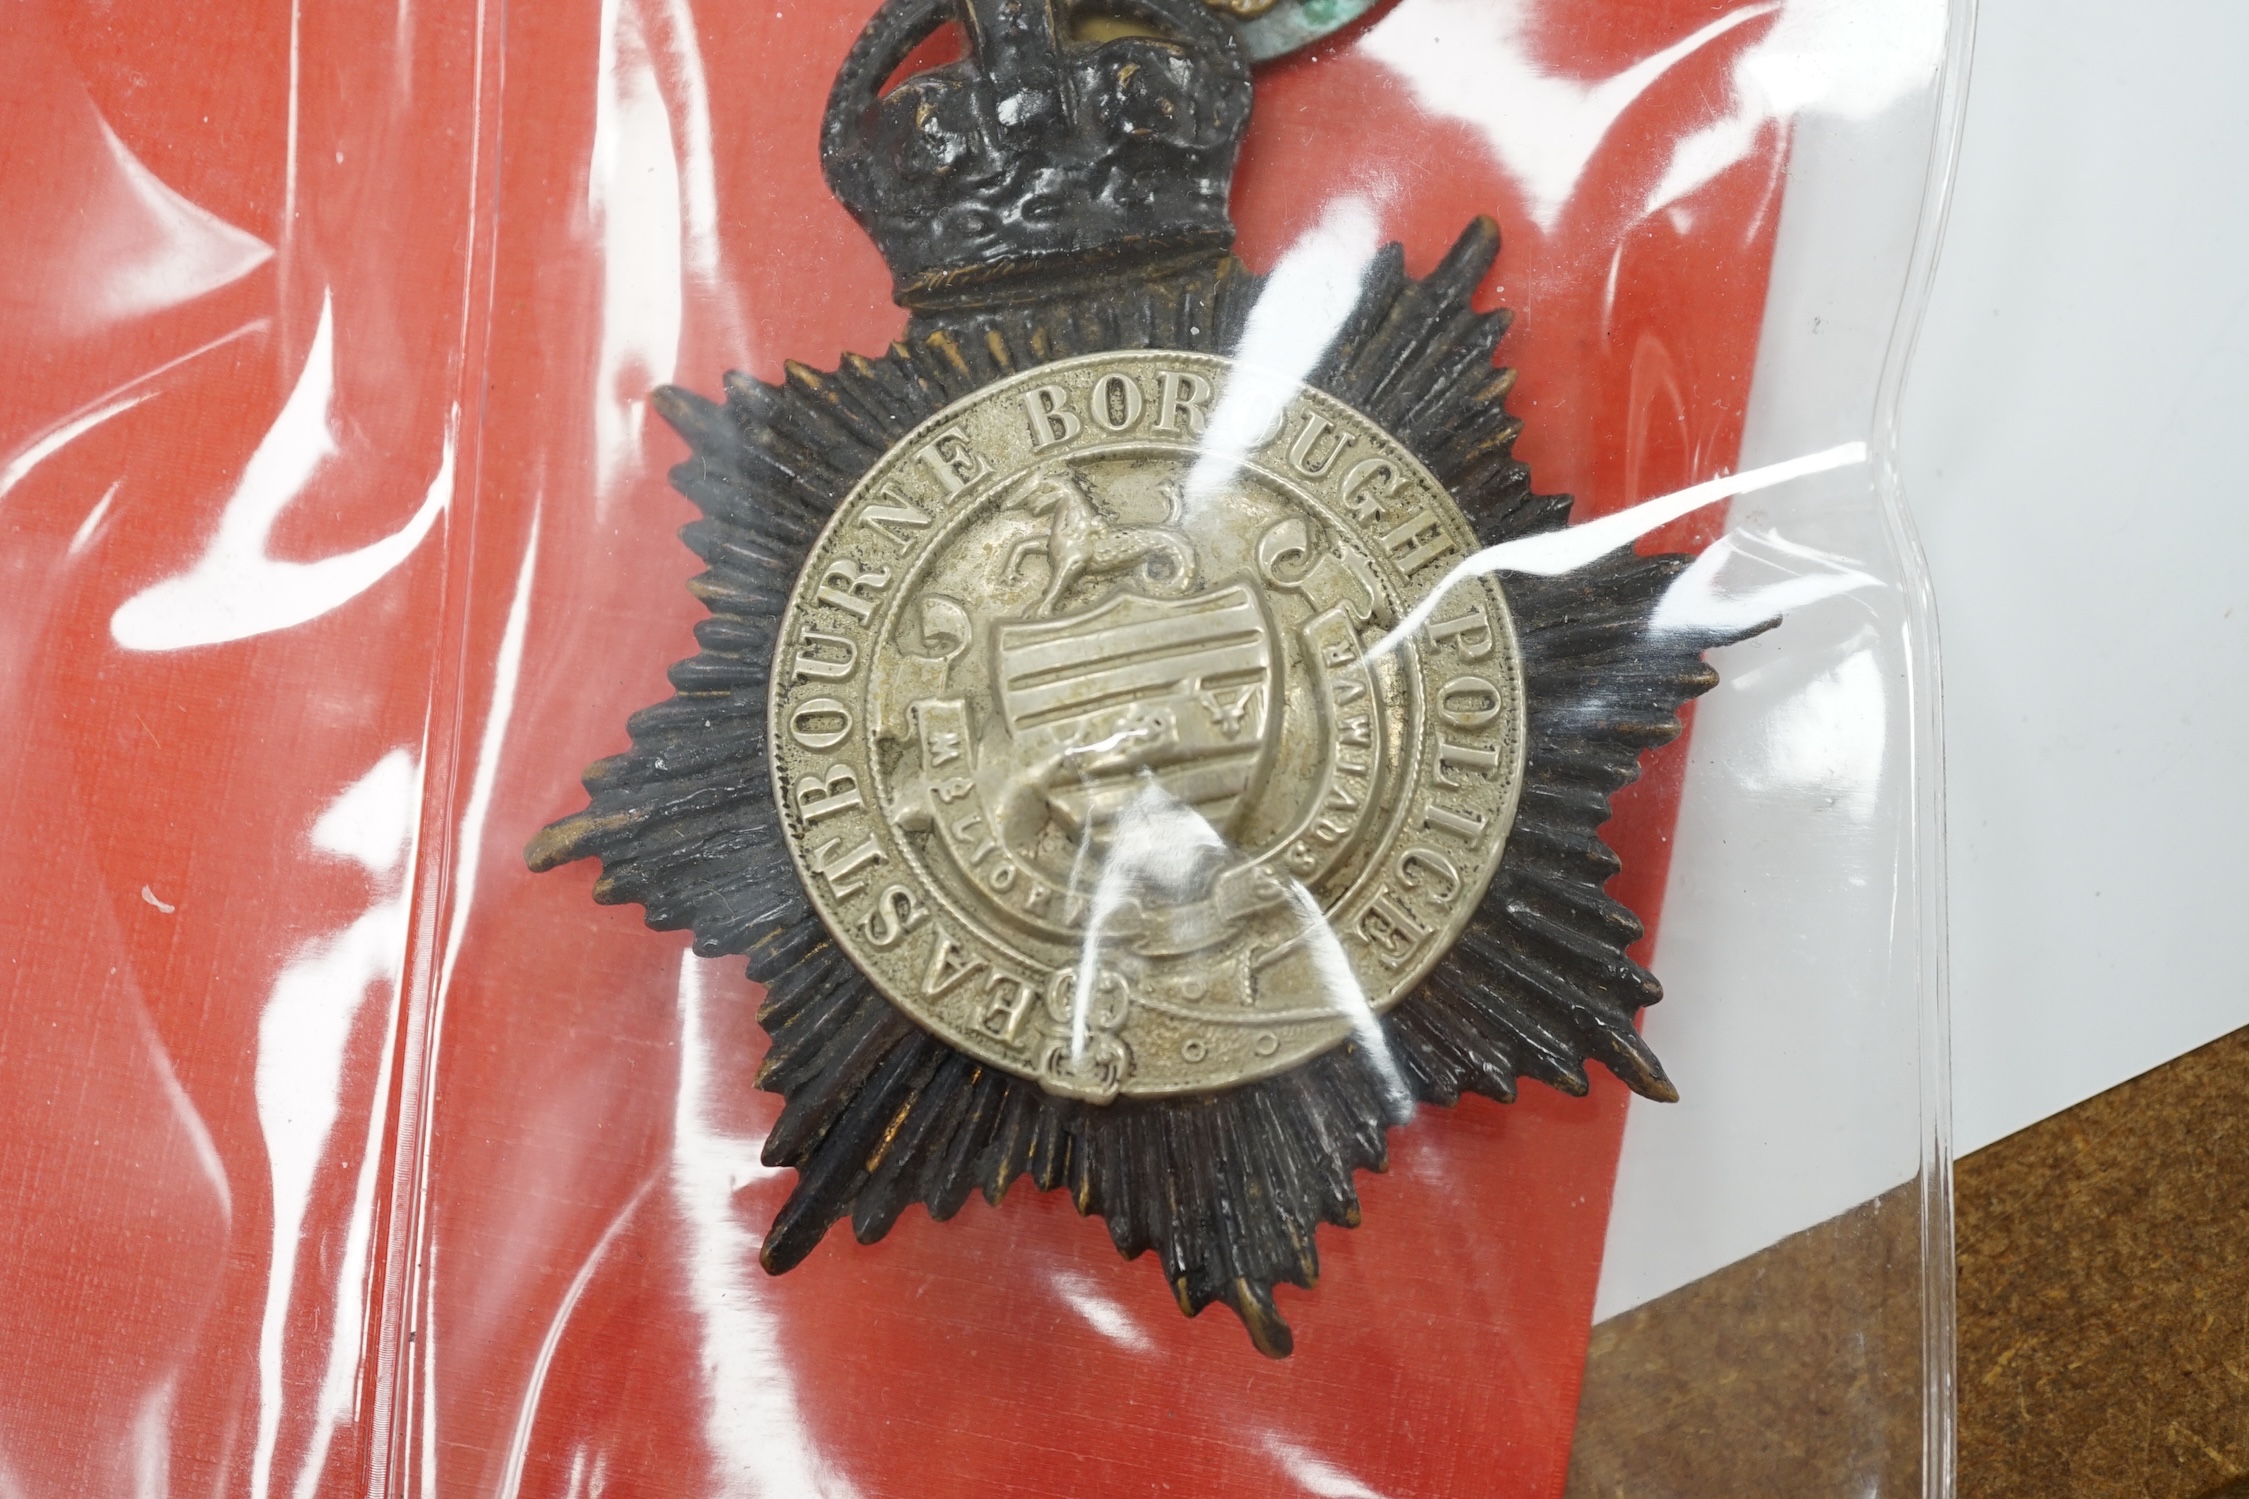 A collection of Police badges and buttons, including to Eastbourne Borough Police helmet plates, Eastbourne Fire Brigade uniform buttons, Royal Navy buttons, a whistle, etc. together with a batten decorated with beadwork